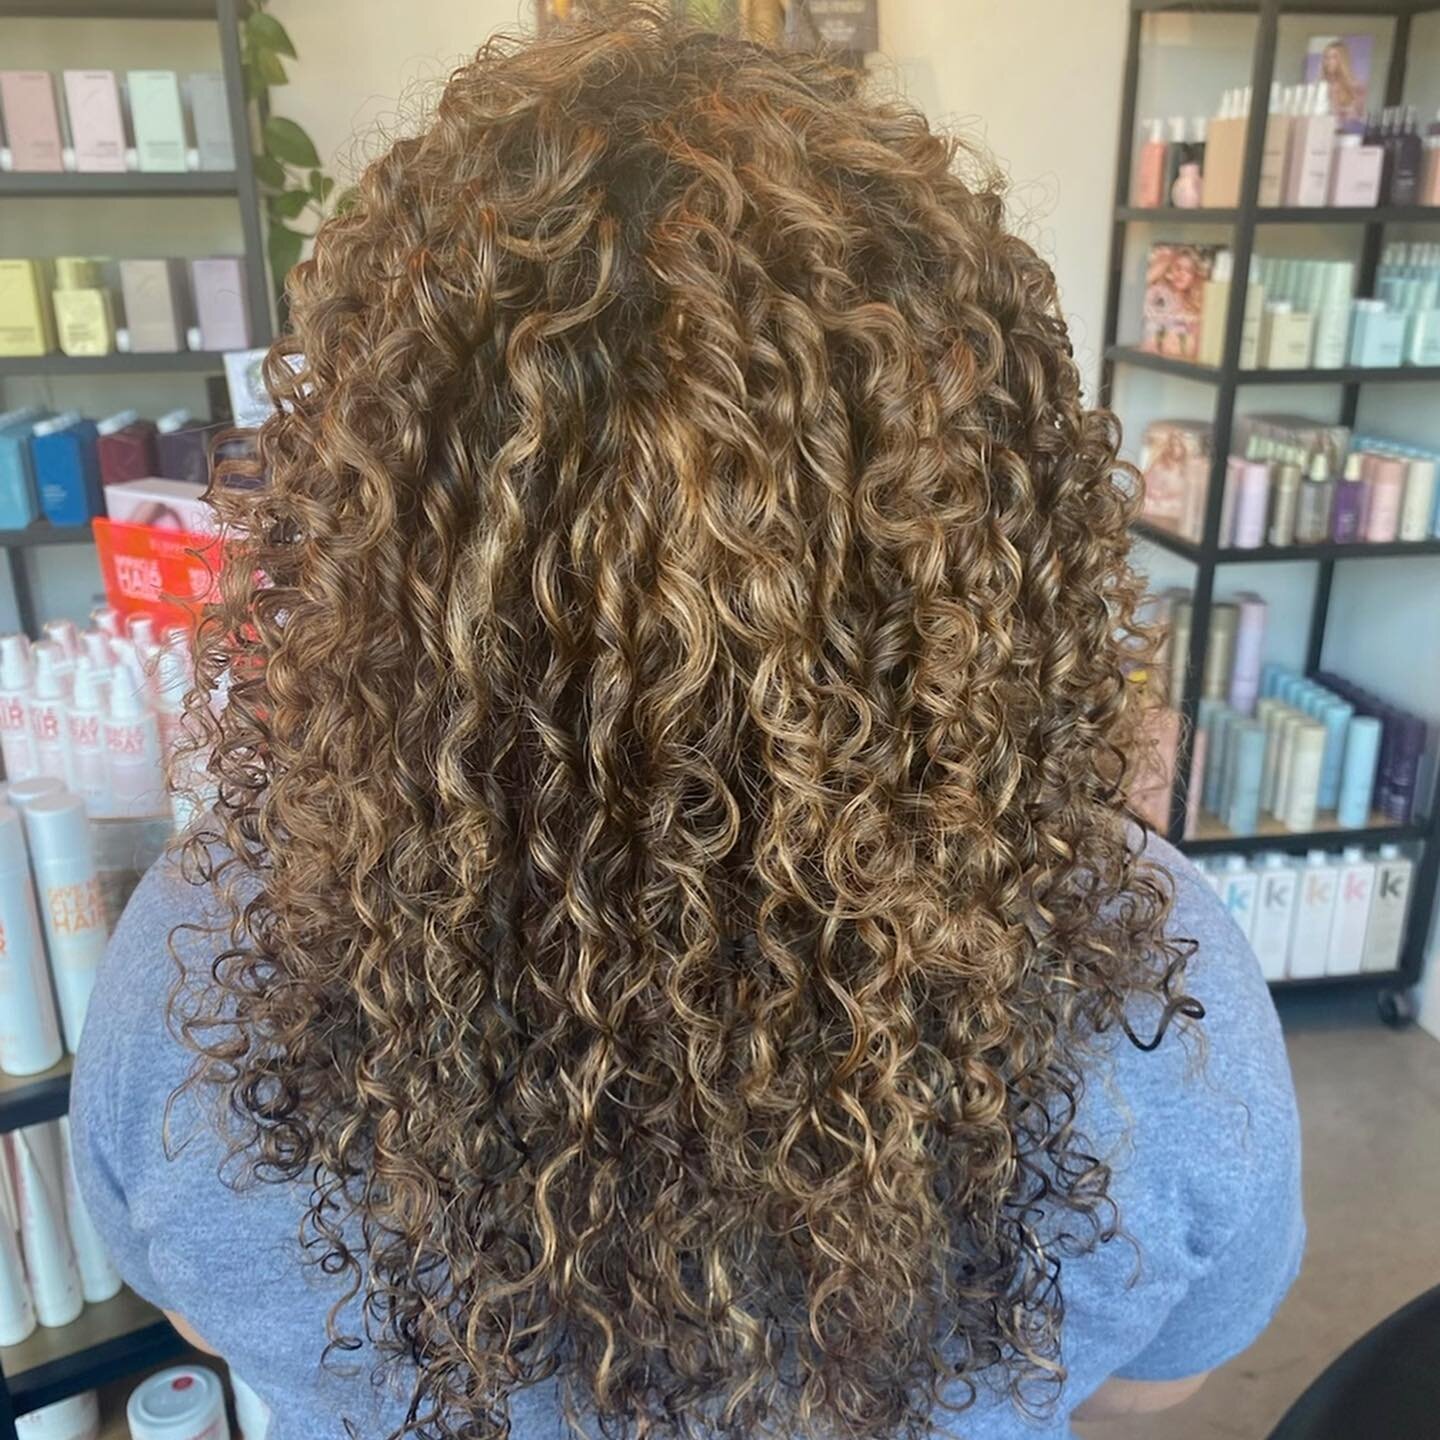 waves, curls, all textures 😍 cuts x color @ayesha_the_hairdruid